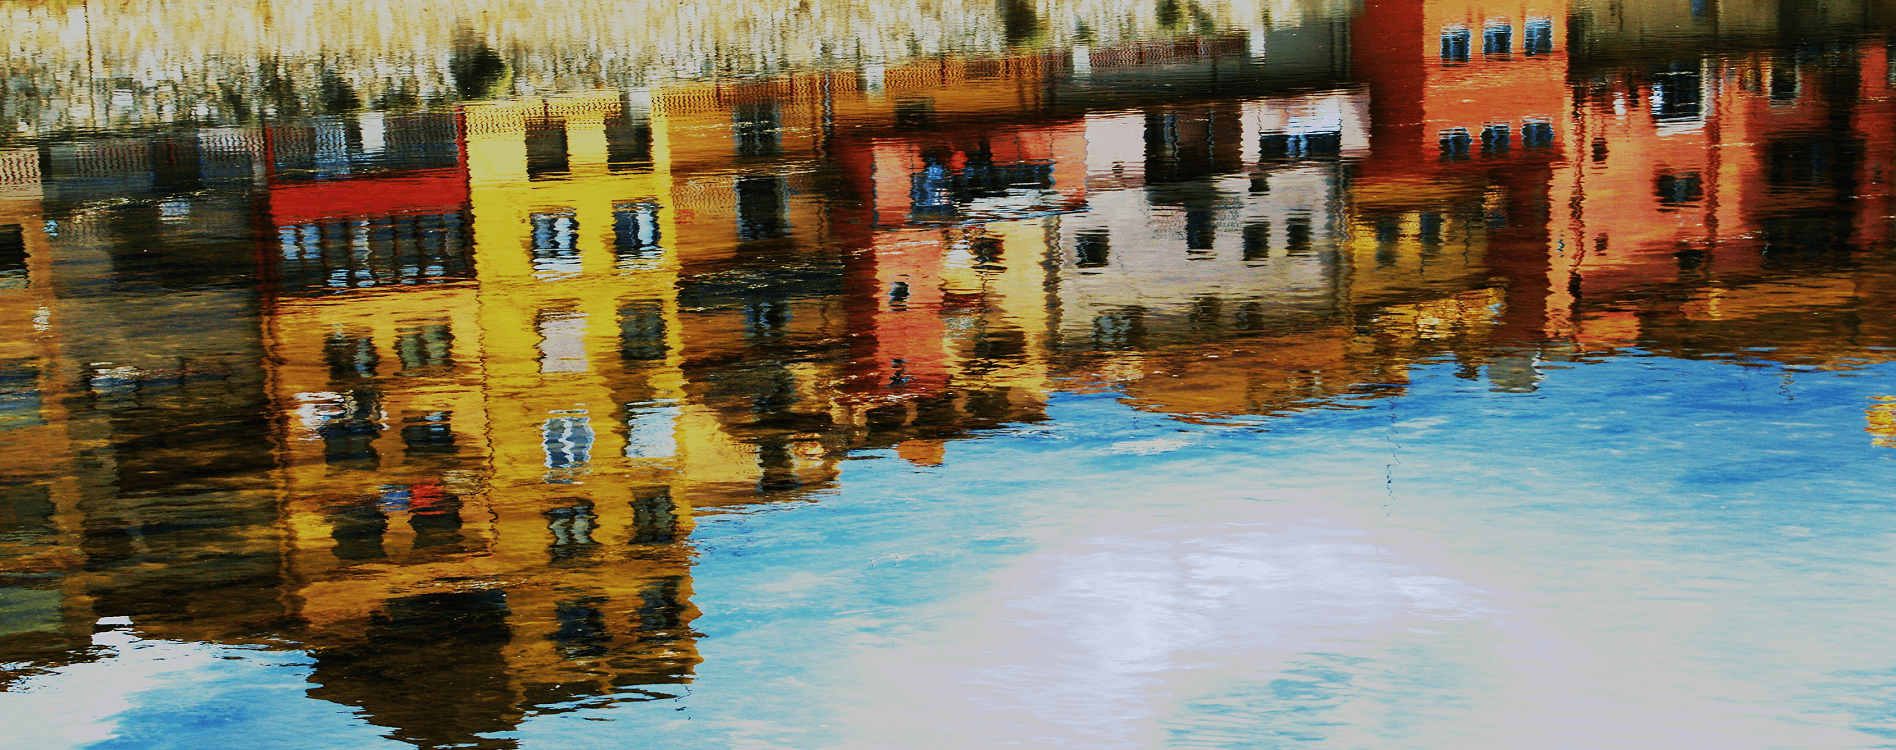 Buildings reflected in the water